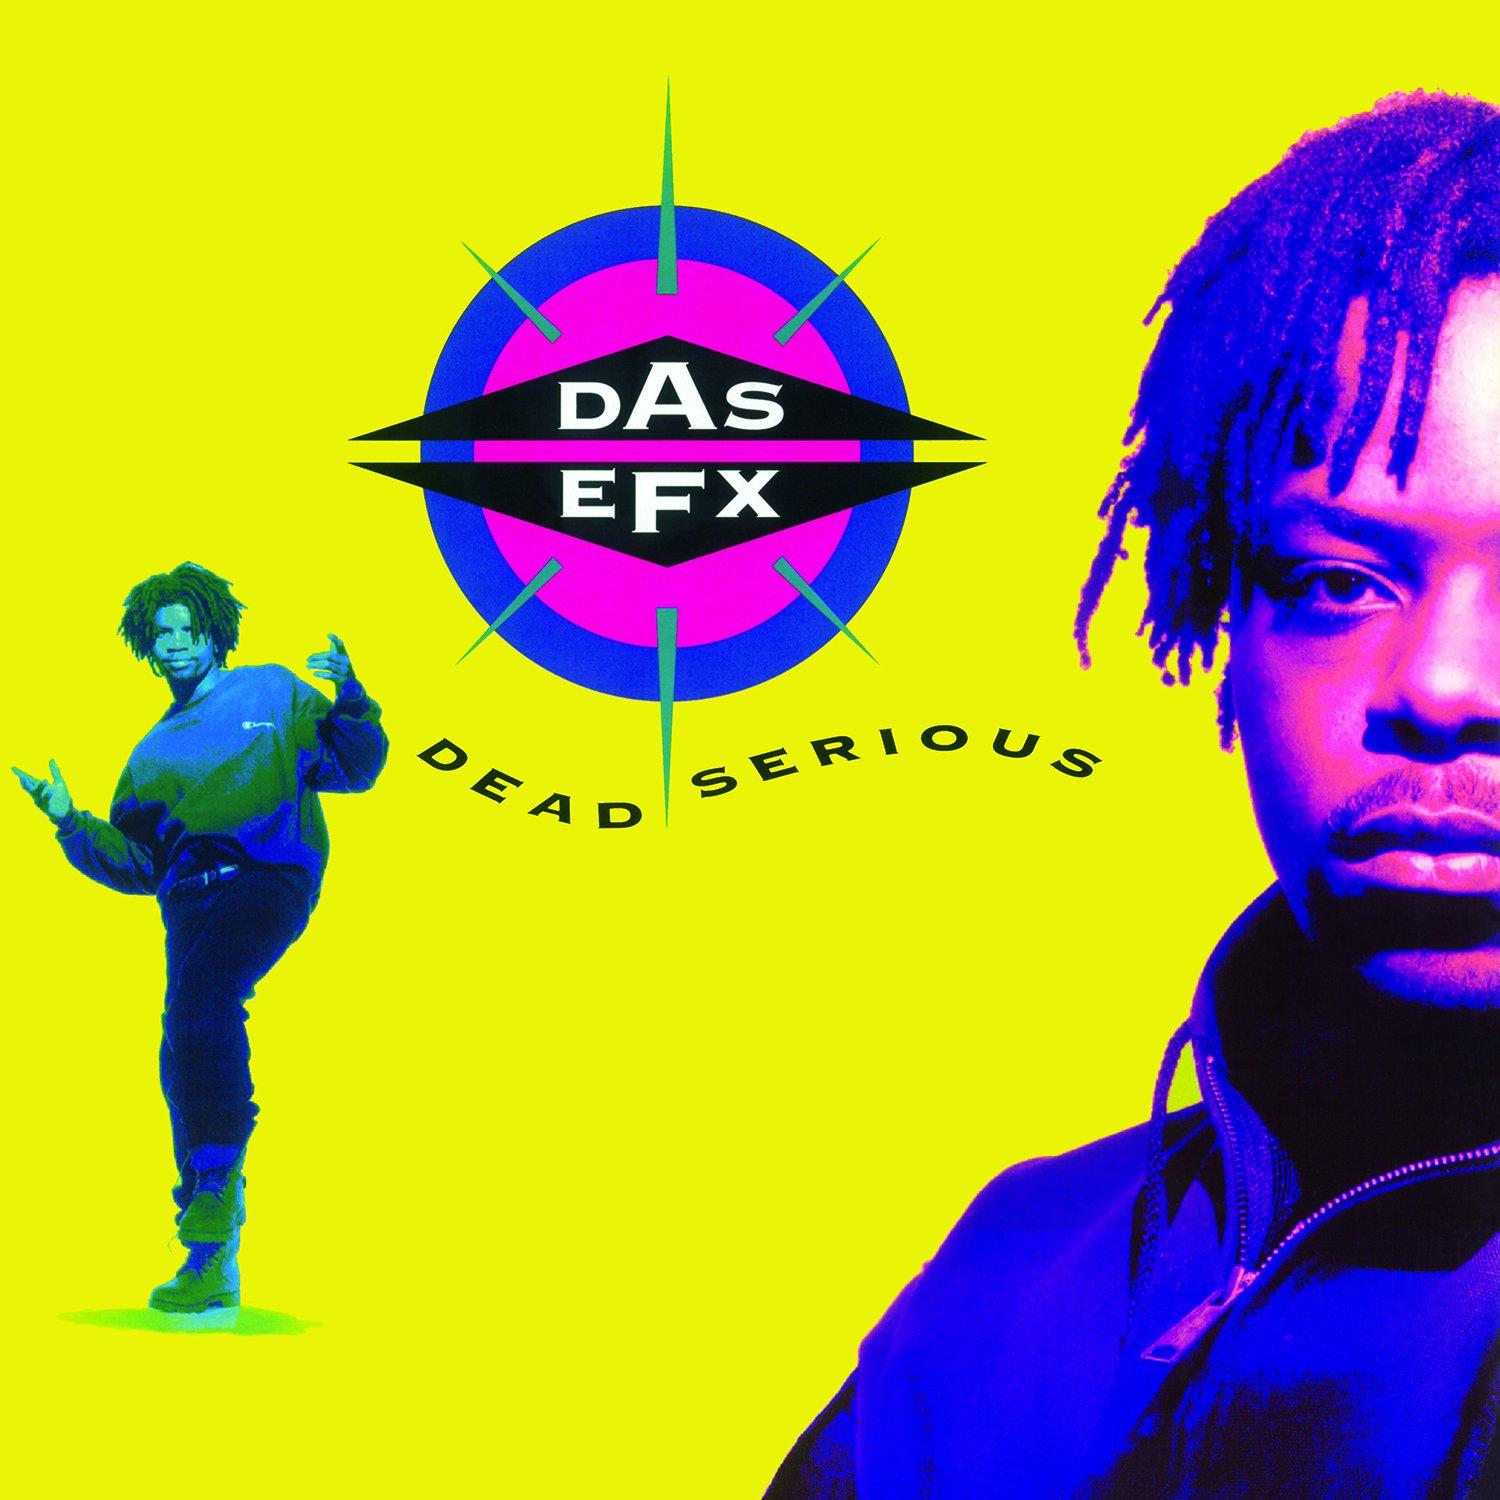 Selected image for DAS EFX - Dead serious -HQ- Insert